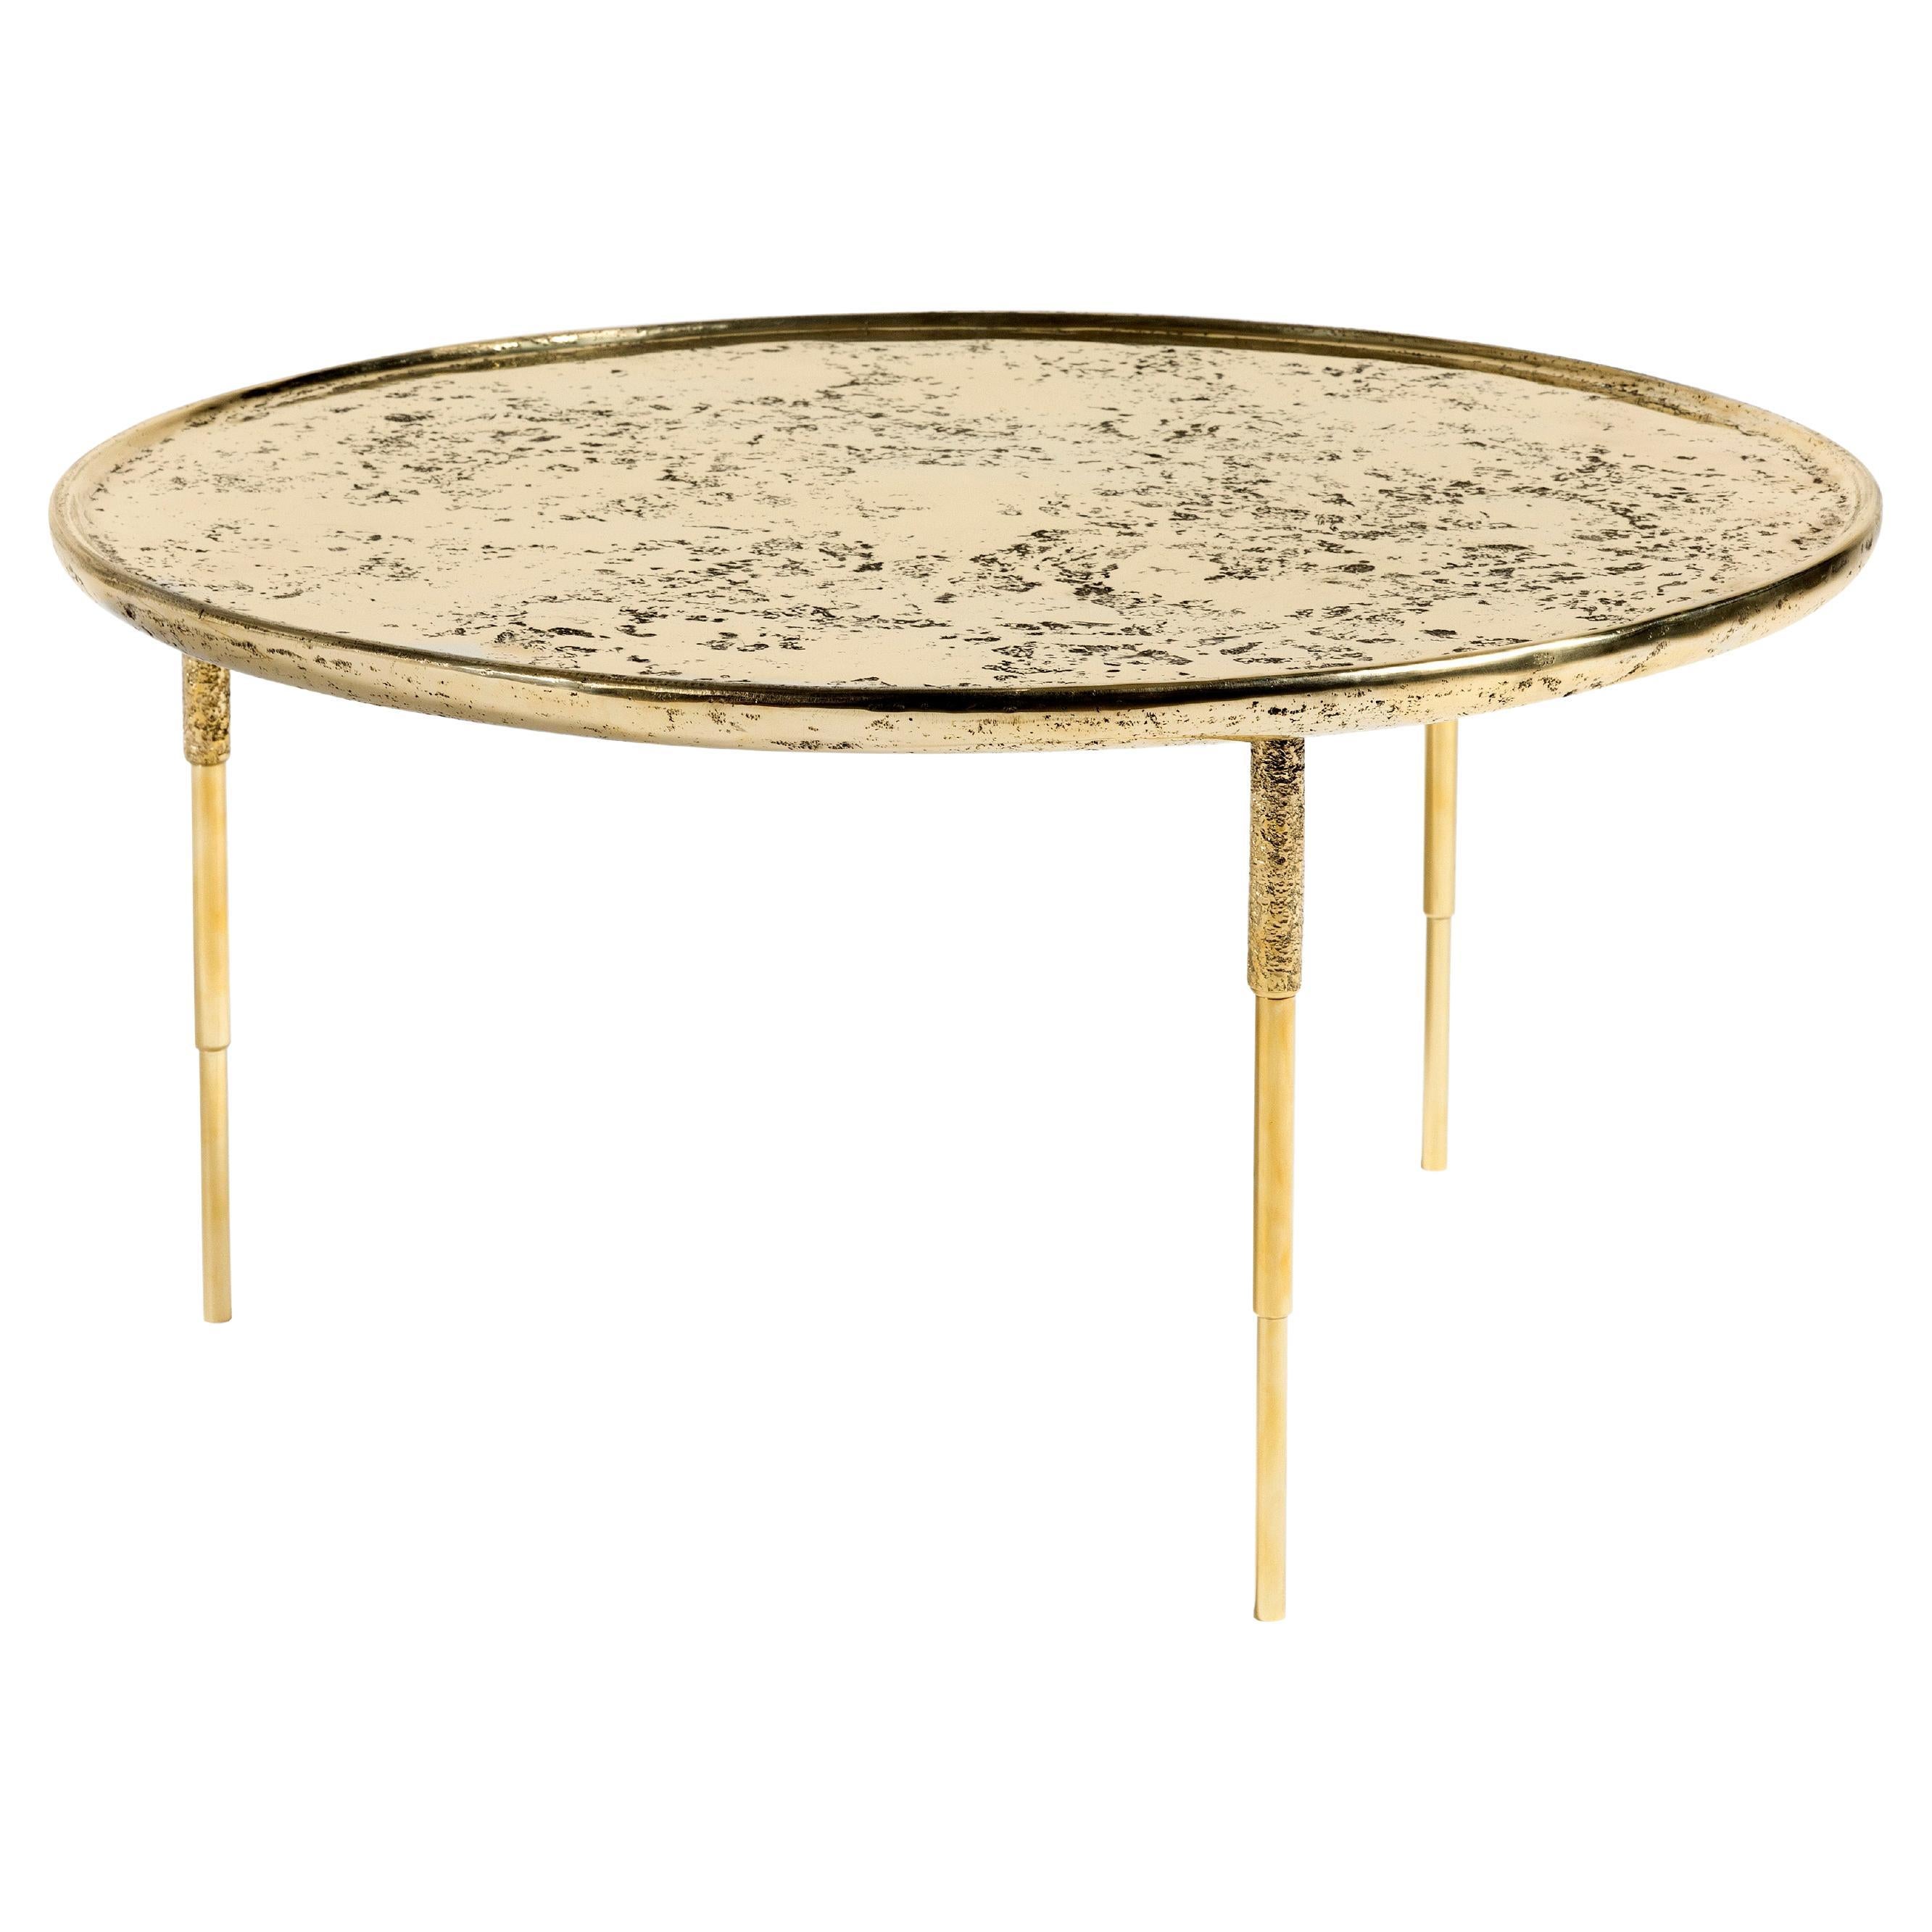 Contemporary Coffee Table by Hessentia in brass casting with sculptural texture